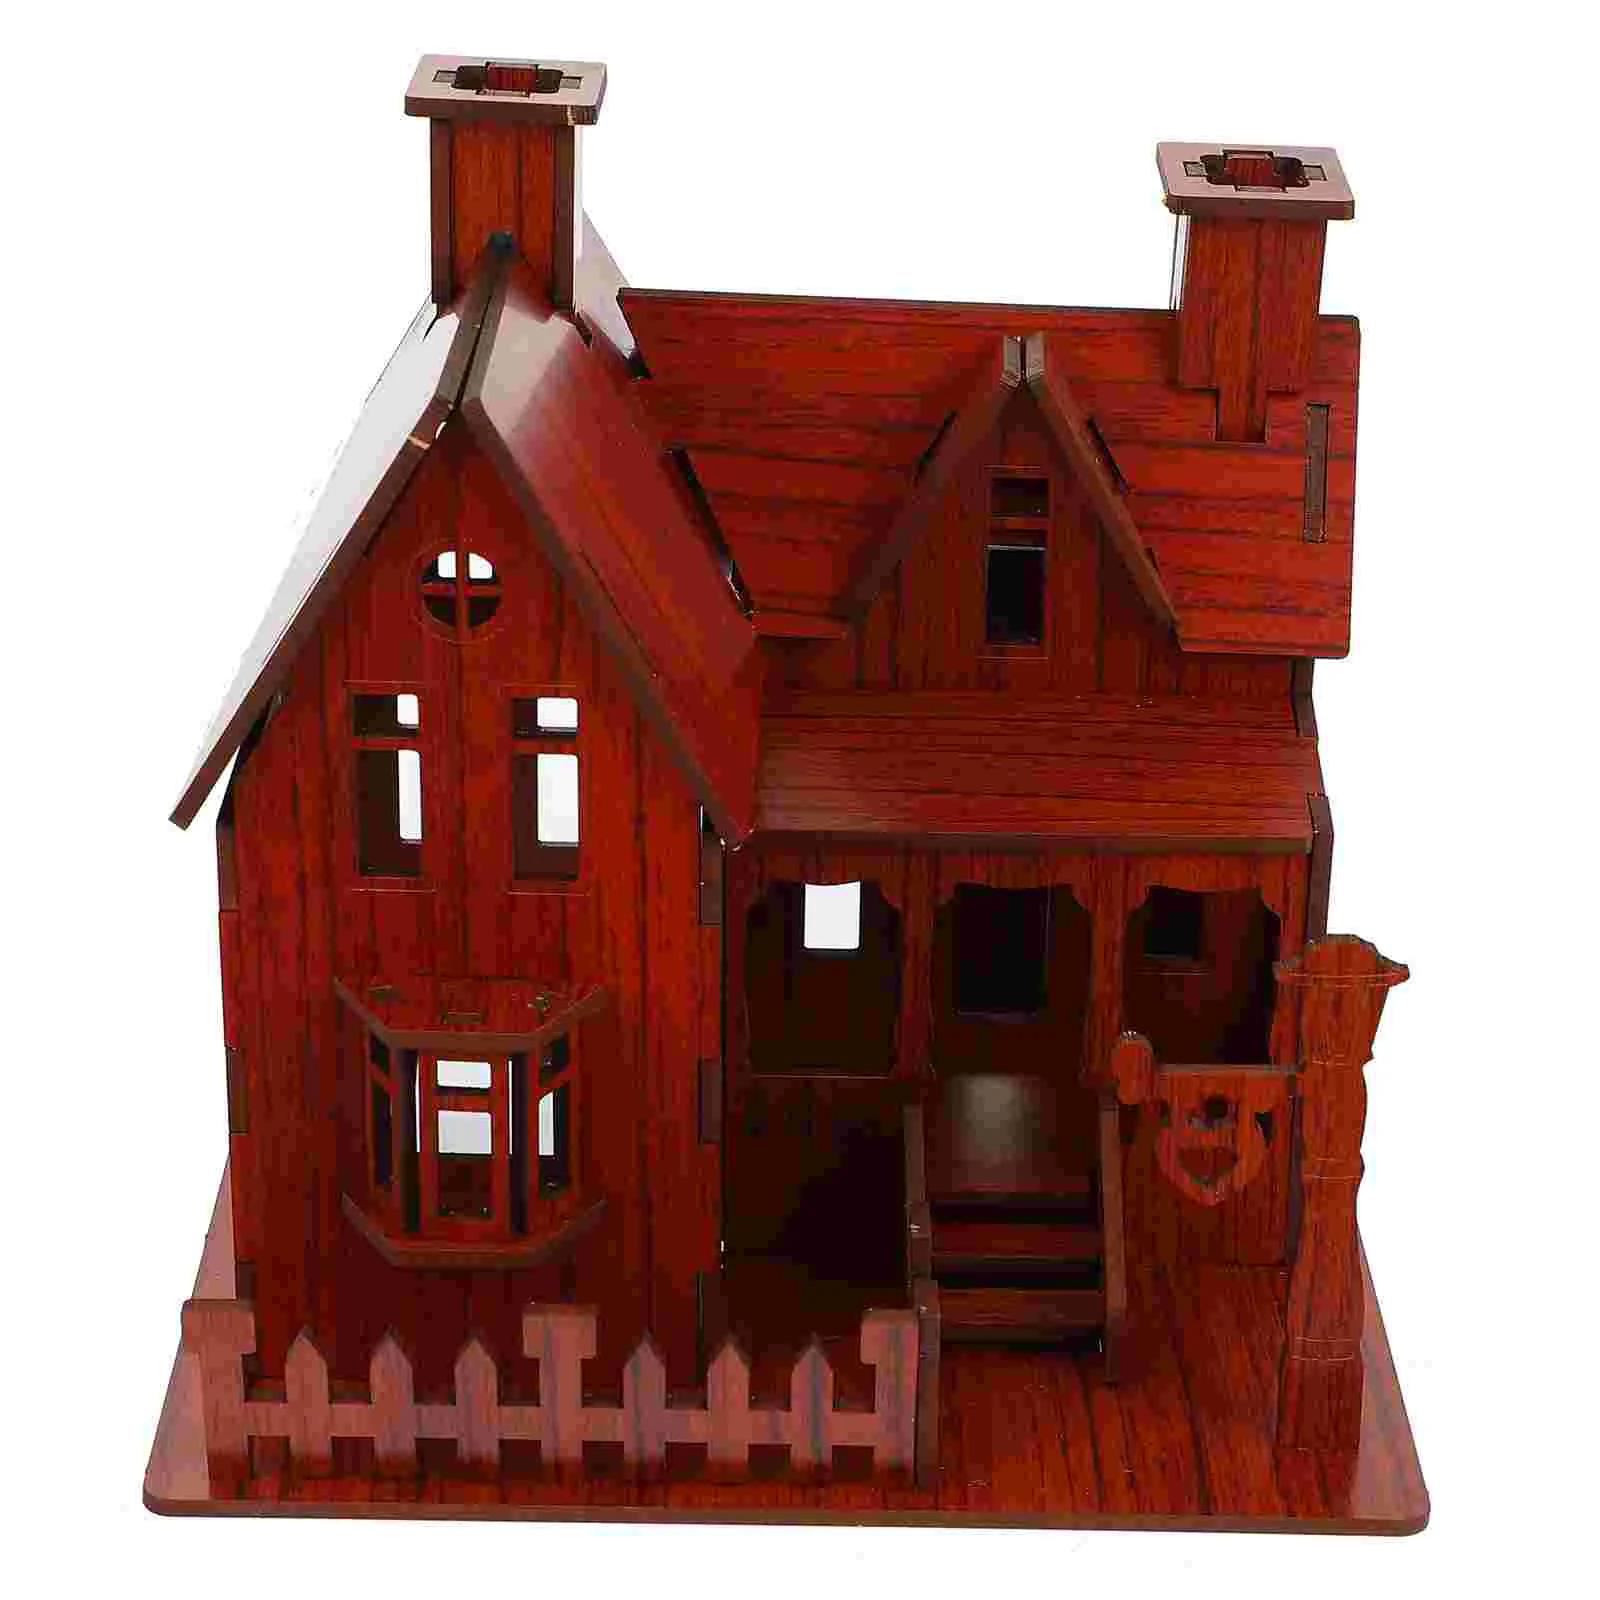 

3d House Kid Jigsaw Puzzles For Kids Villa Model Toy Assembled Assemble Puzzle Toy Wood Kids DIY Toy Child Educational Toy